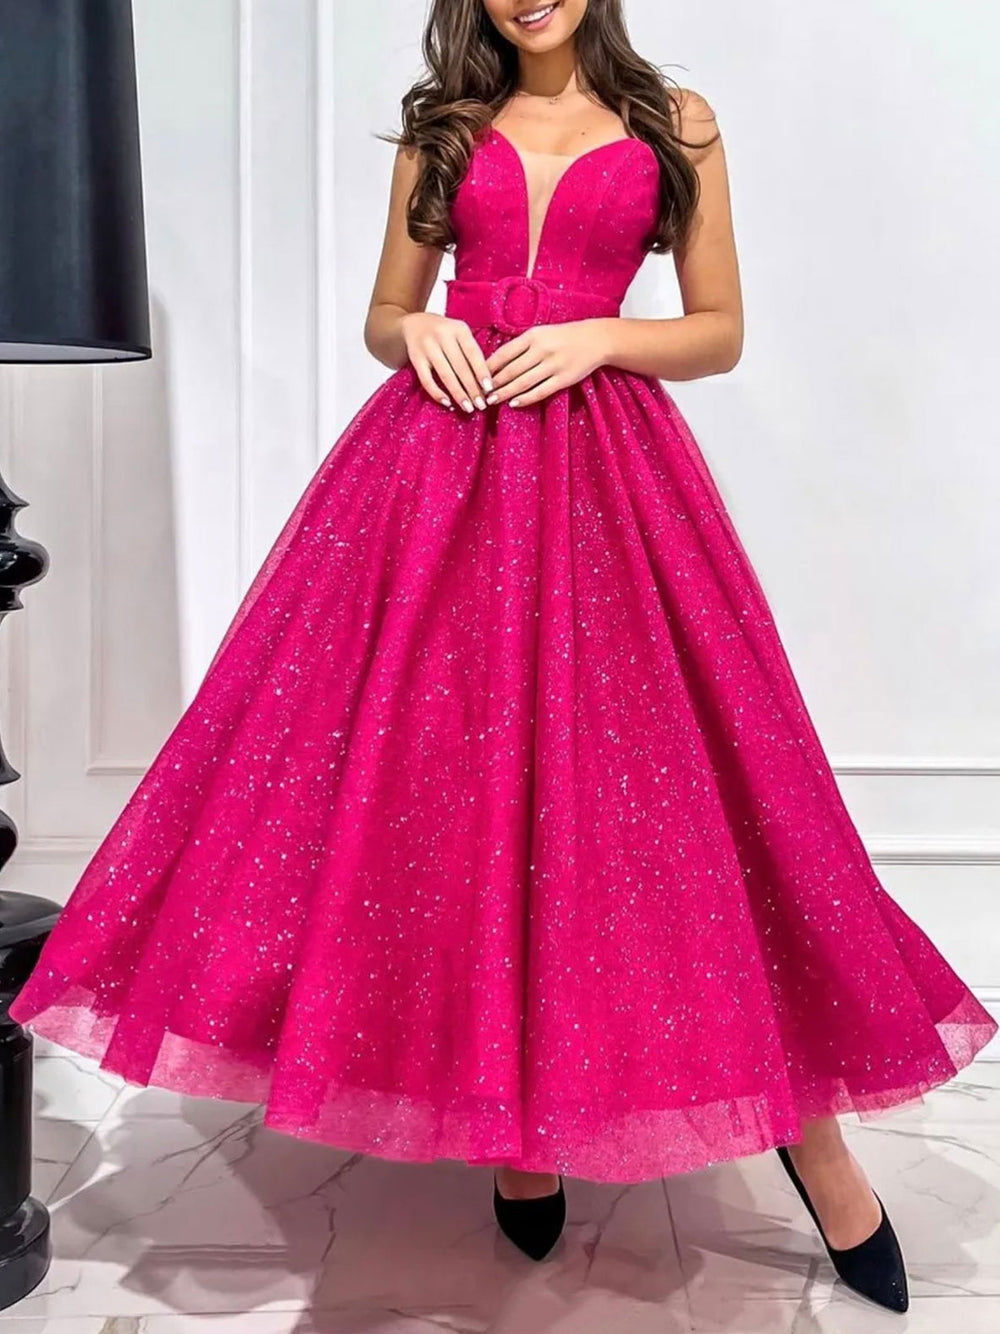 Simple red tea length tulle prom dress formal party dress